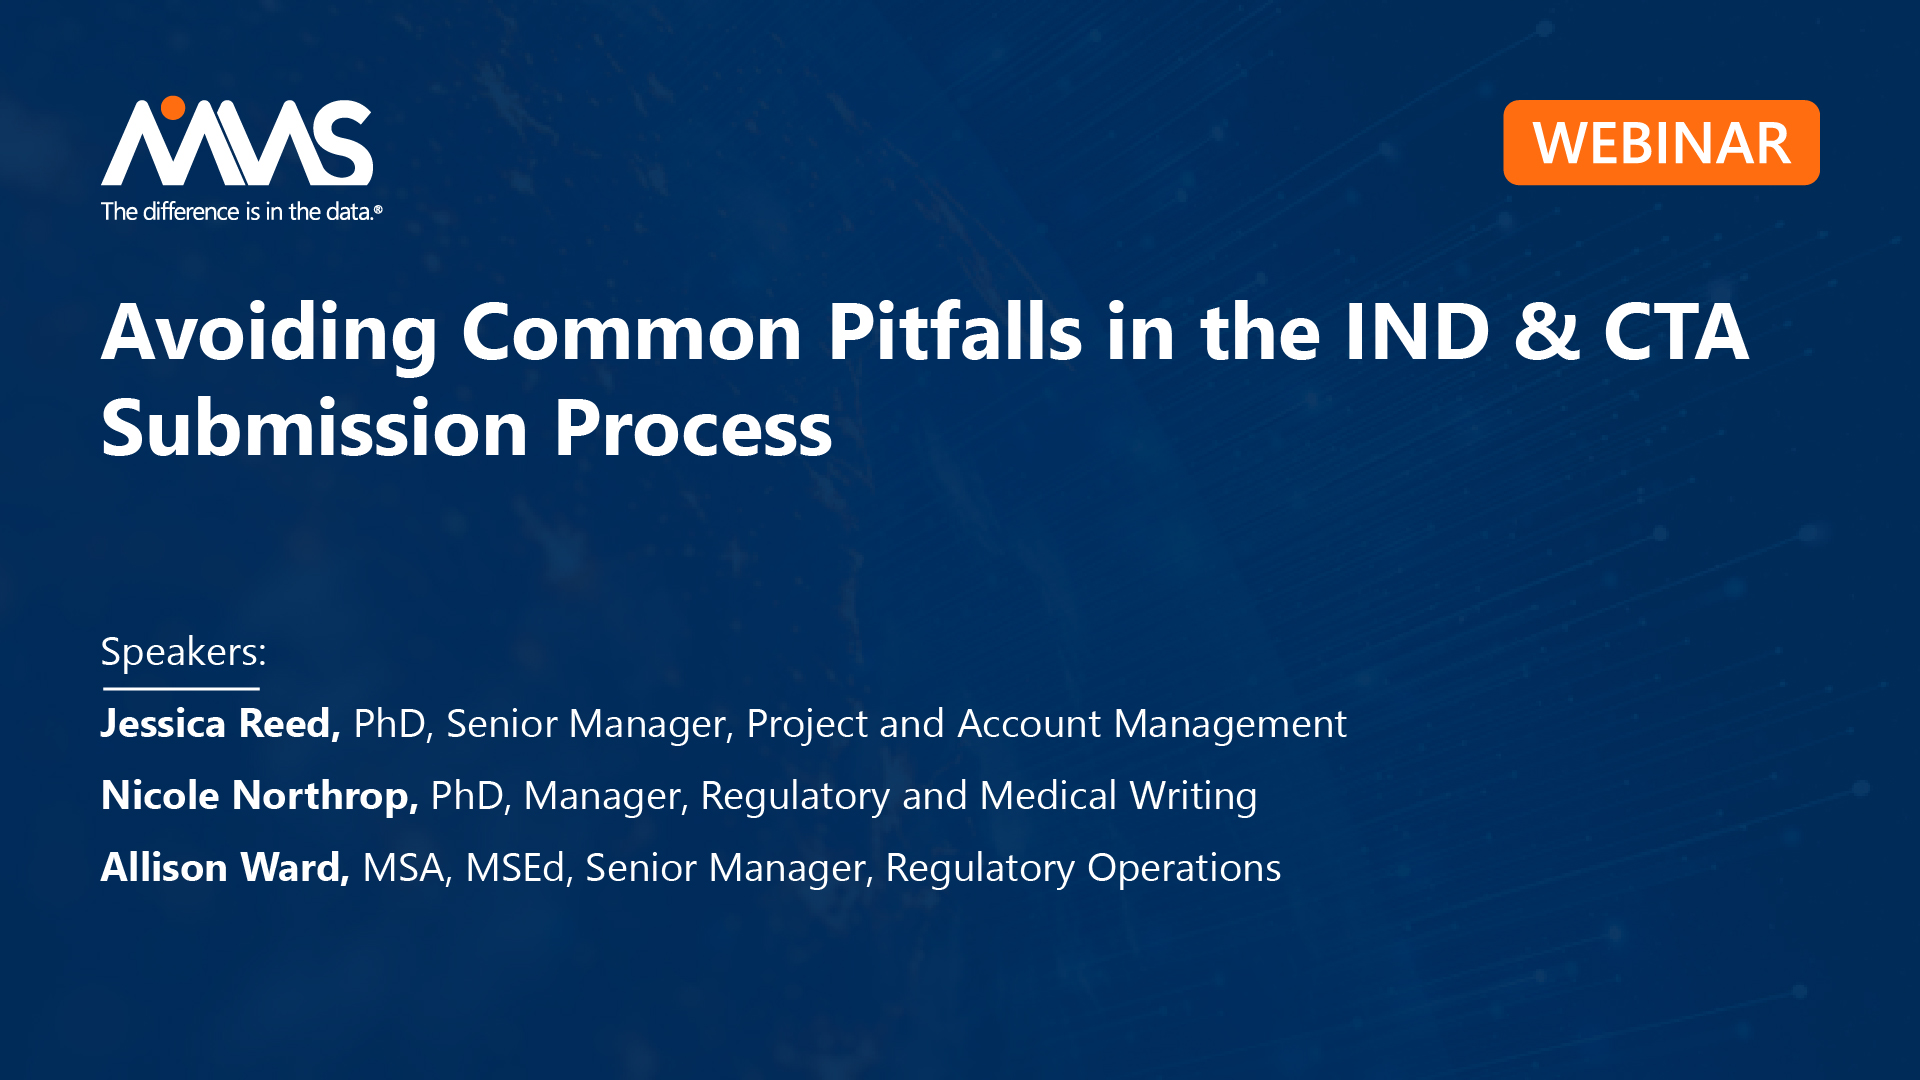 Avoiding Common Pitfalls in the IND and CTA Submission Process